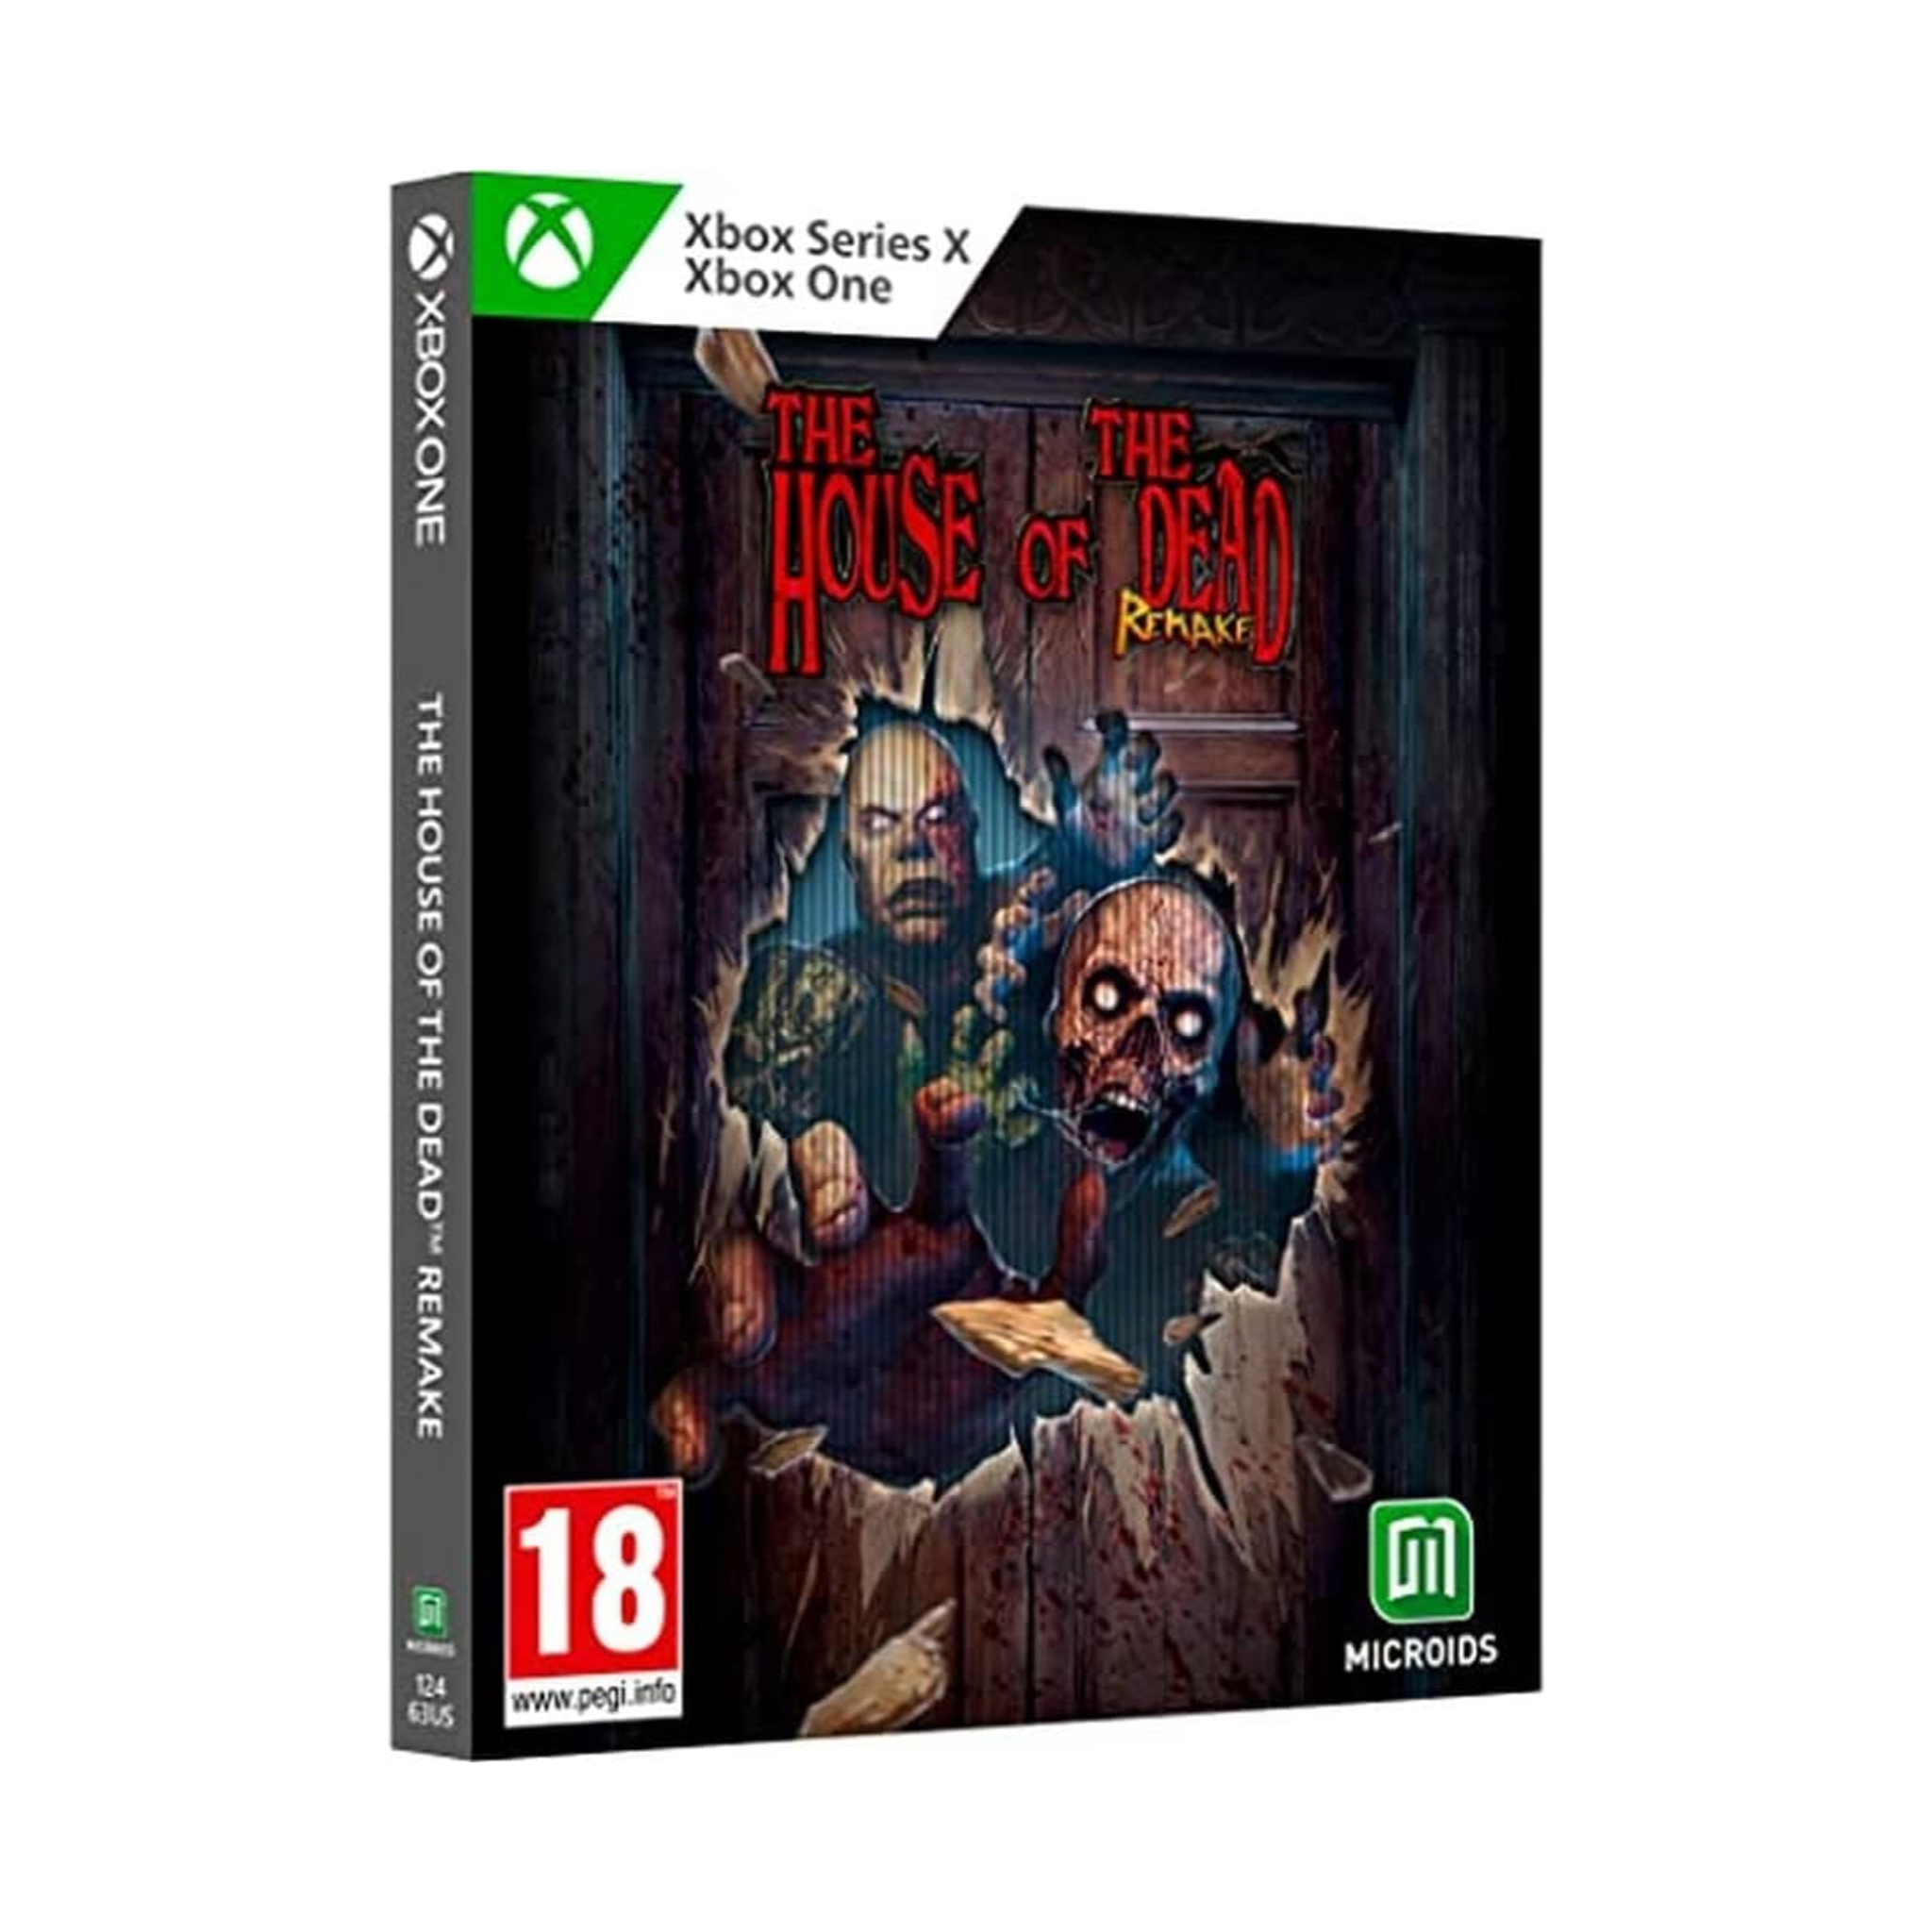 Image of The House of the Dead - Limidead Edition Video Game for Xbox series X/Xbox One